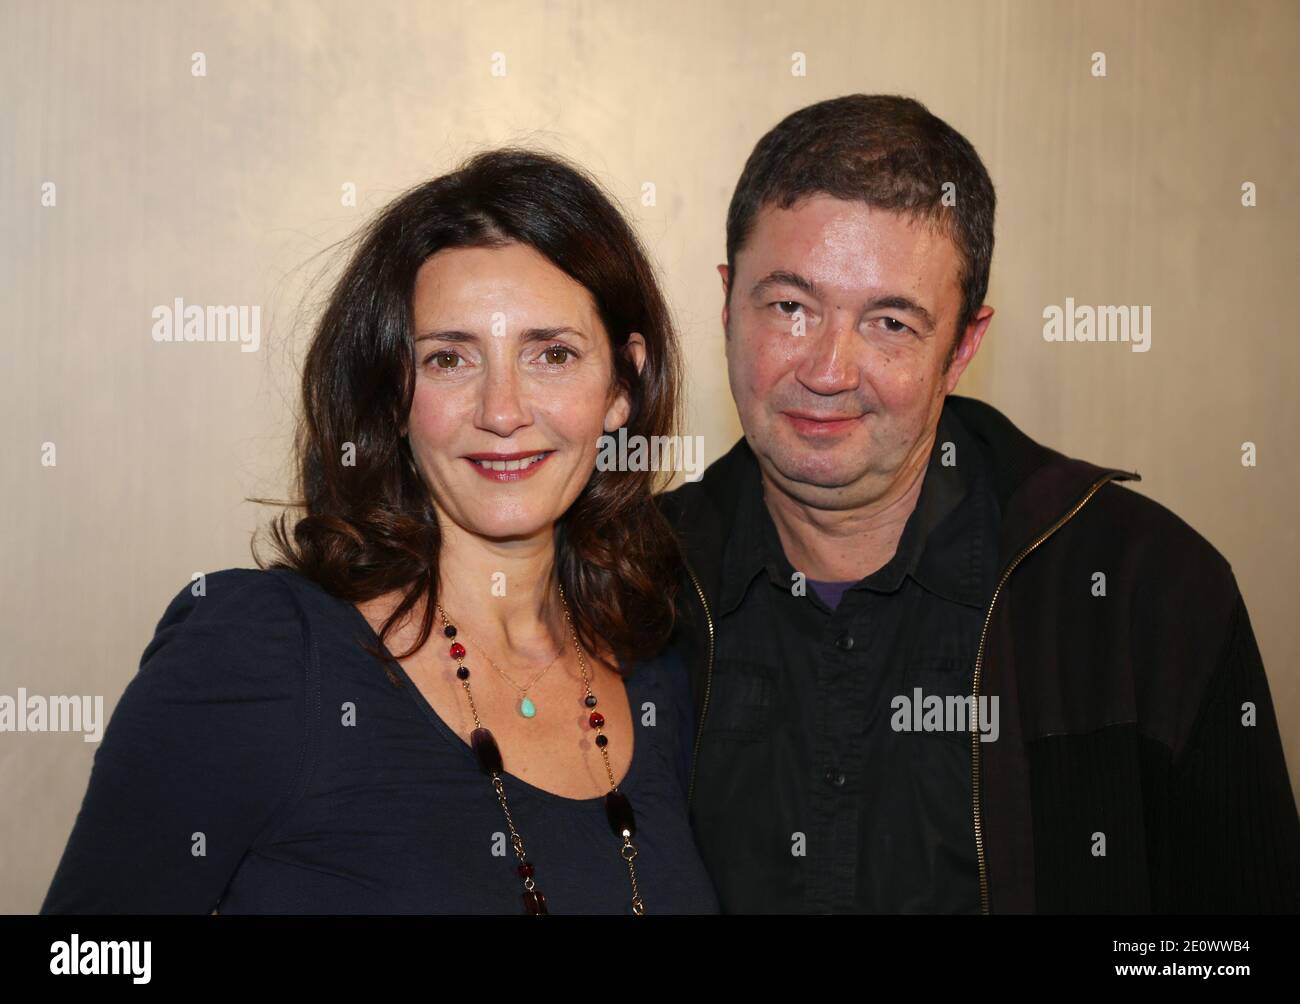 Valerie Karsenti and Frederic Bouraly attending the 19th Prix du Producteur Francais de Television (French TV Producer Awards) held at Pavillon Cambon in Paris, France on December 10,2012. Photo by Denis Guignebourg/ABACAPRESS.COM Stock Photo